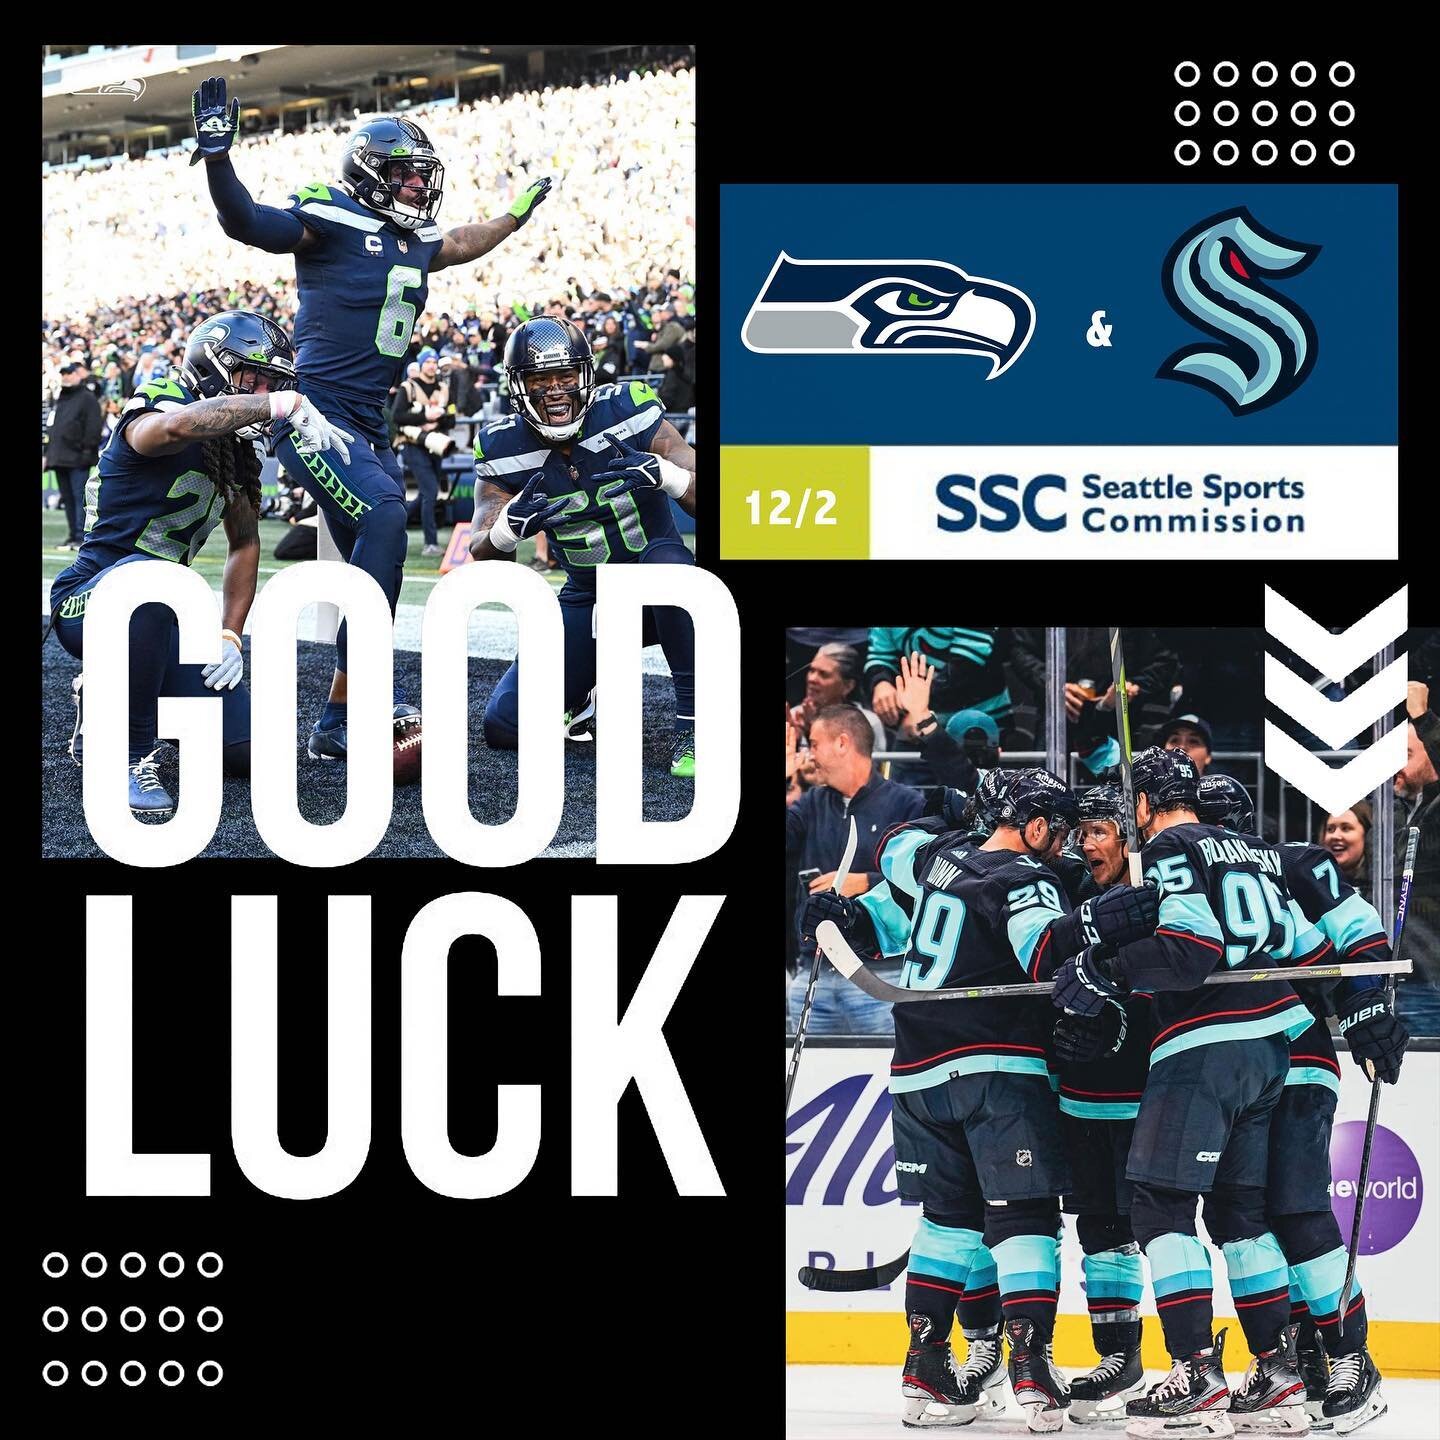 Are you ready, Seattle? 👀
🏒 The @seattlekraken look to pick up a win against the Florida Panthers this Saturday at 7:00 PM at @climatepledgearena!
🏈 The @seahawks look to get back on track as they take on the LA Rams this Sunday at 1:05 PM at SoFi